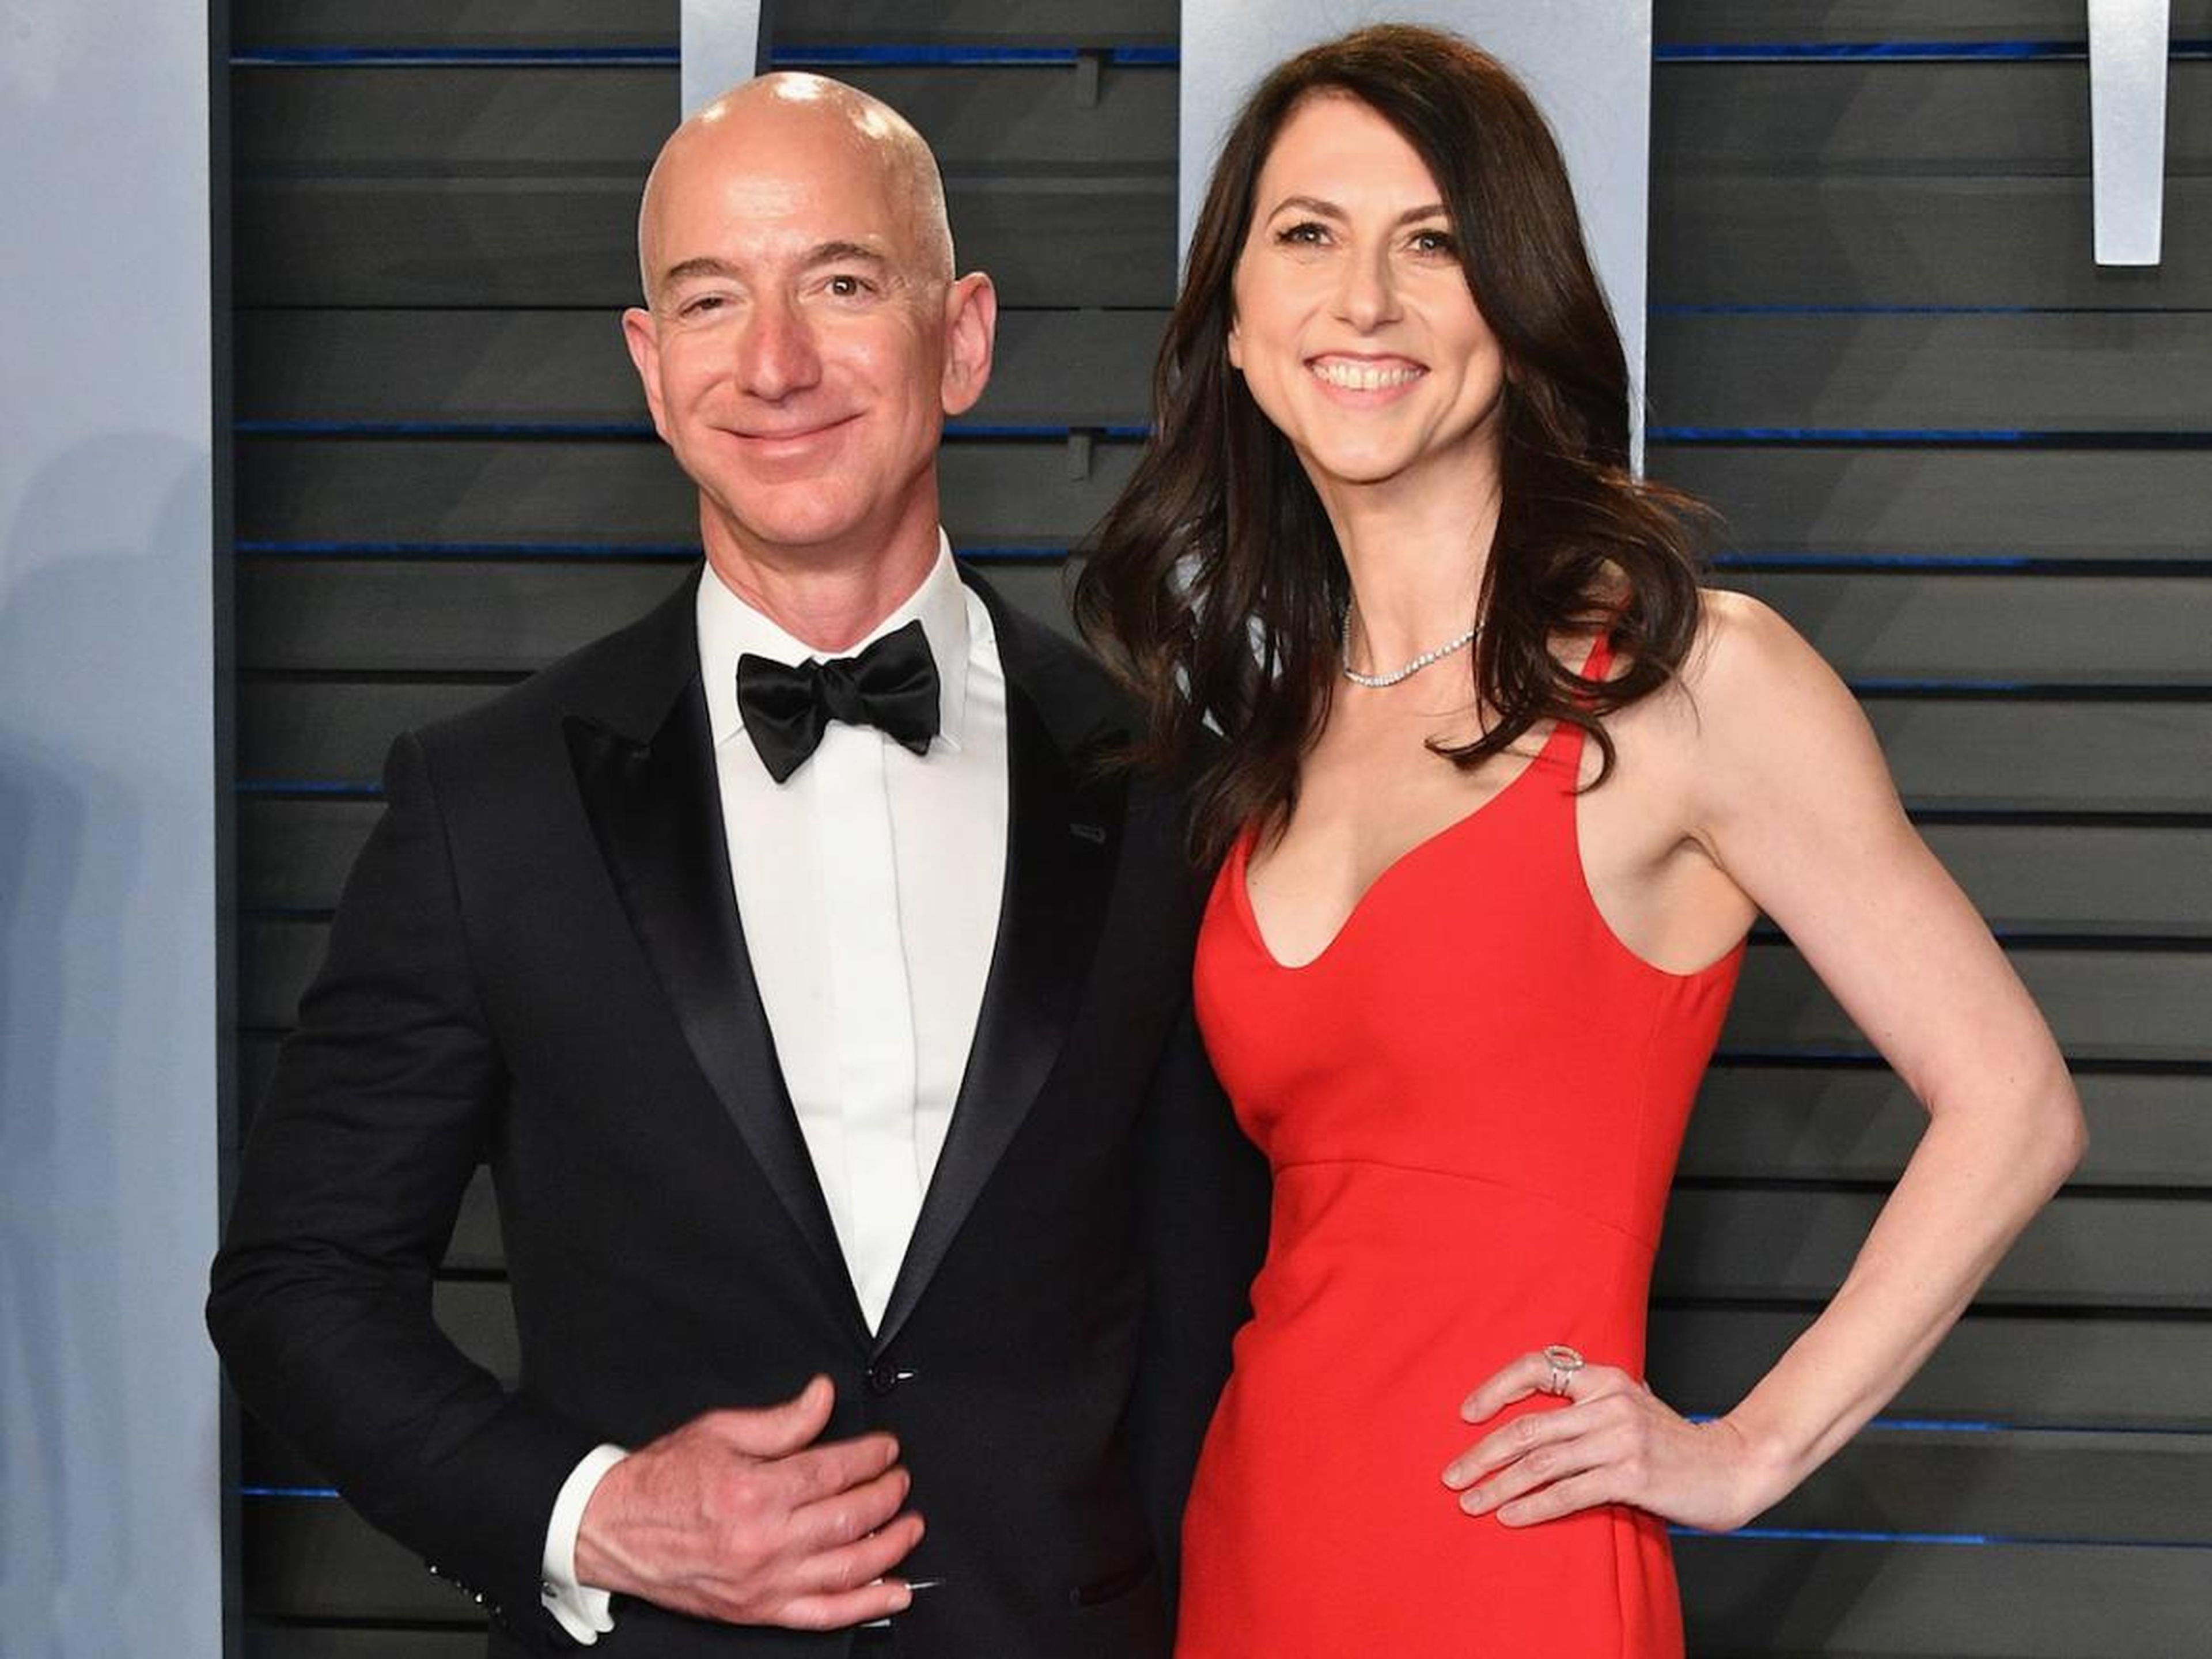 Jeff Bezos is reportedly apartment hunting in NYC following the finalization of the terms of his divorce from MacKenzie Bezos.